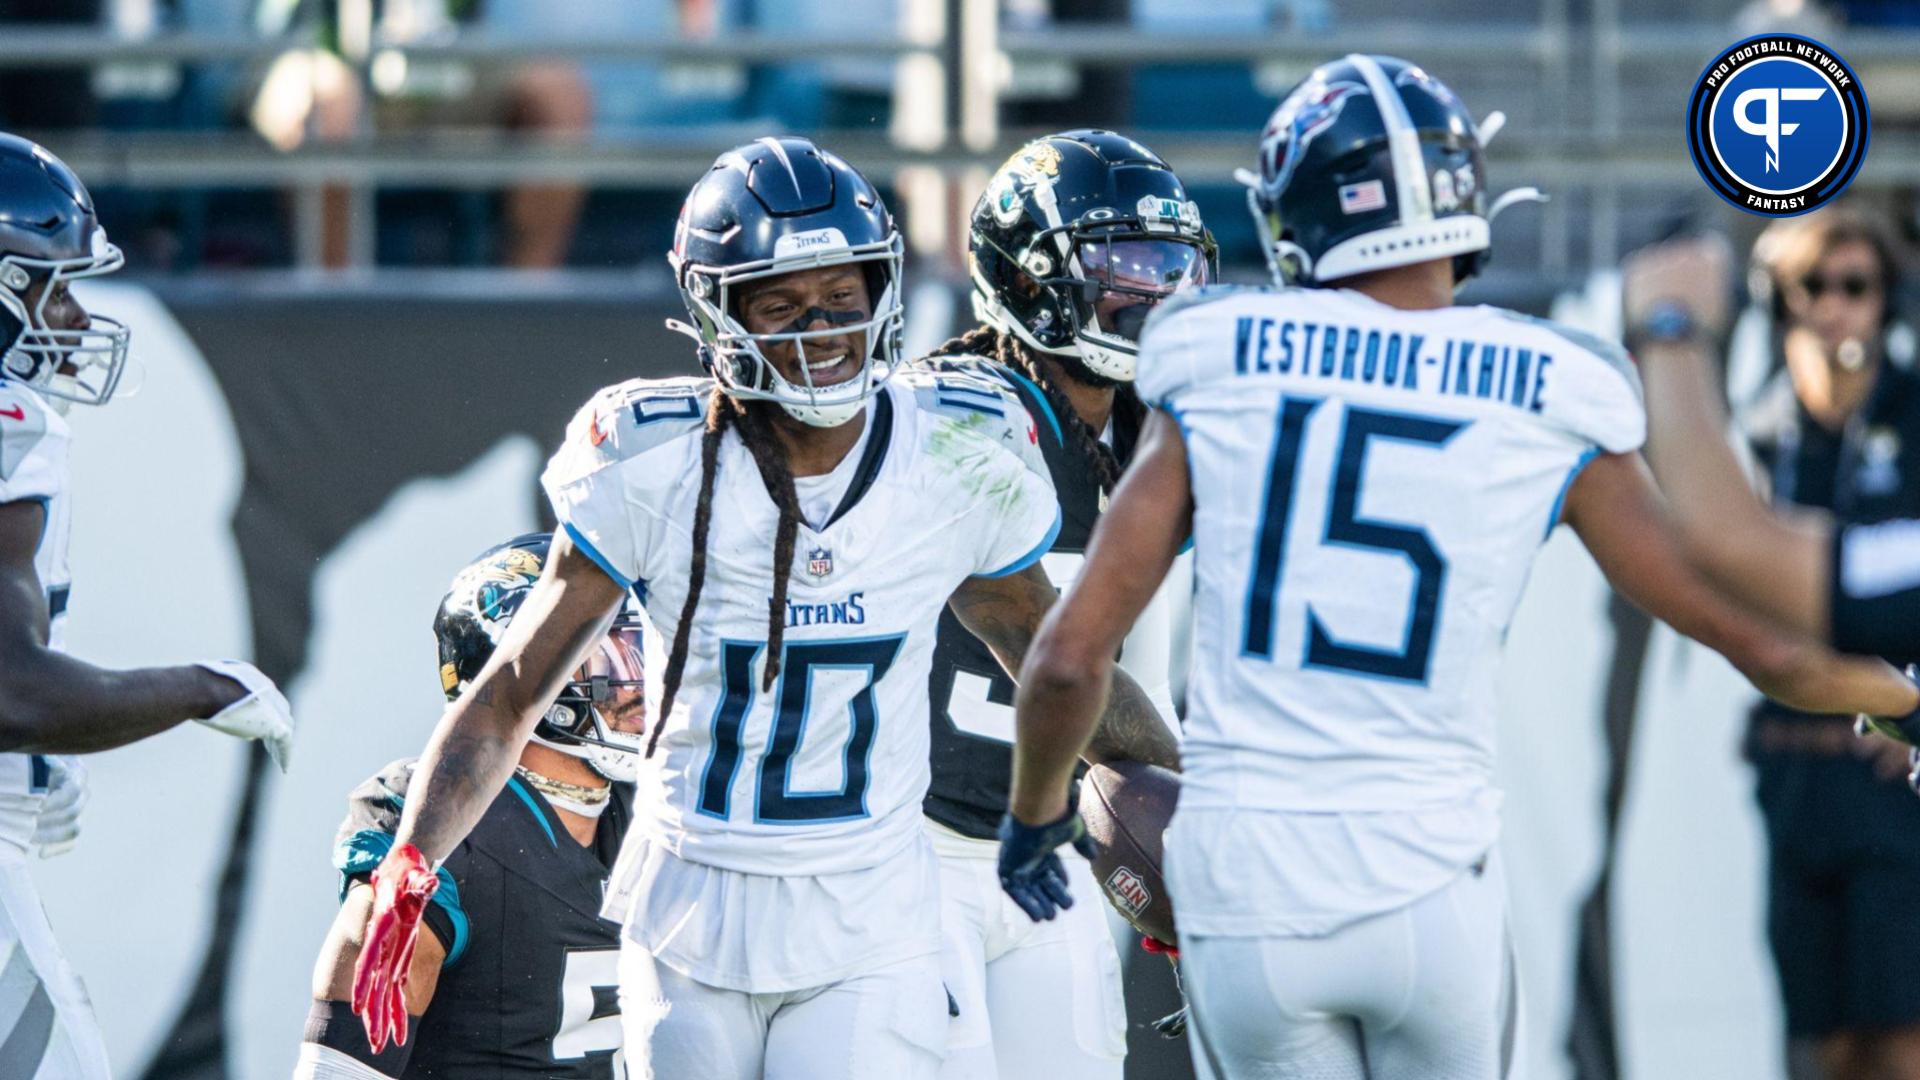 Tennessee Titans wide receiver DeAndre Hopkins (10) celebrates the touchdown with Tennessee Titans wide receiver Nick Westbrook-Ikhine (15) against the Jacksonville Jaguars in the third quarter at EverBank Stadium.